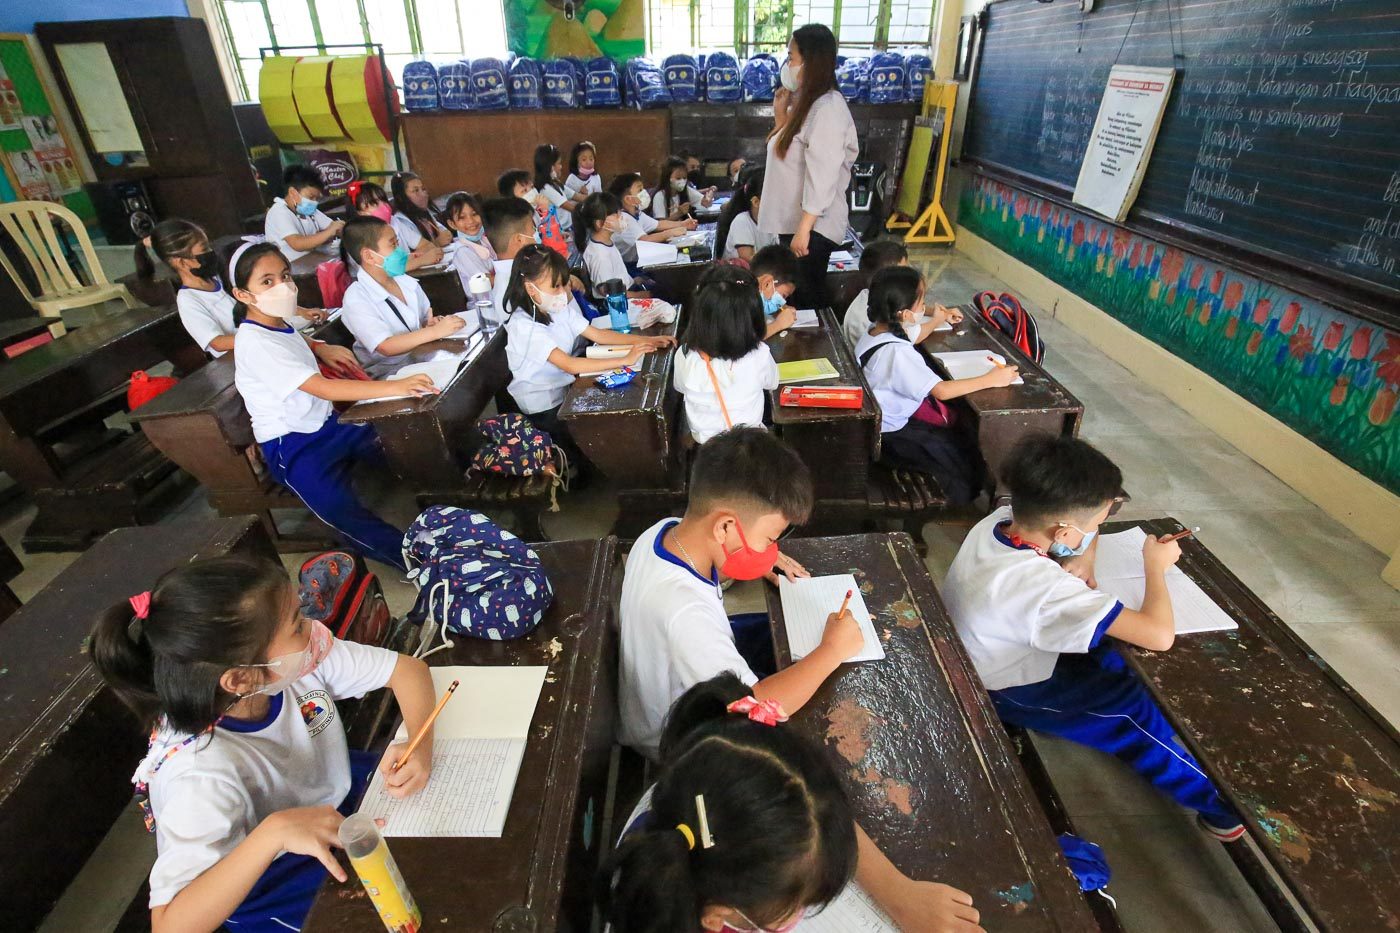 Malacañang suspends work in gov’t, classes in public schools on September 26